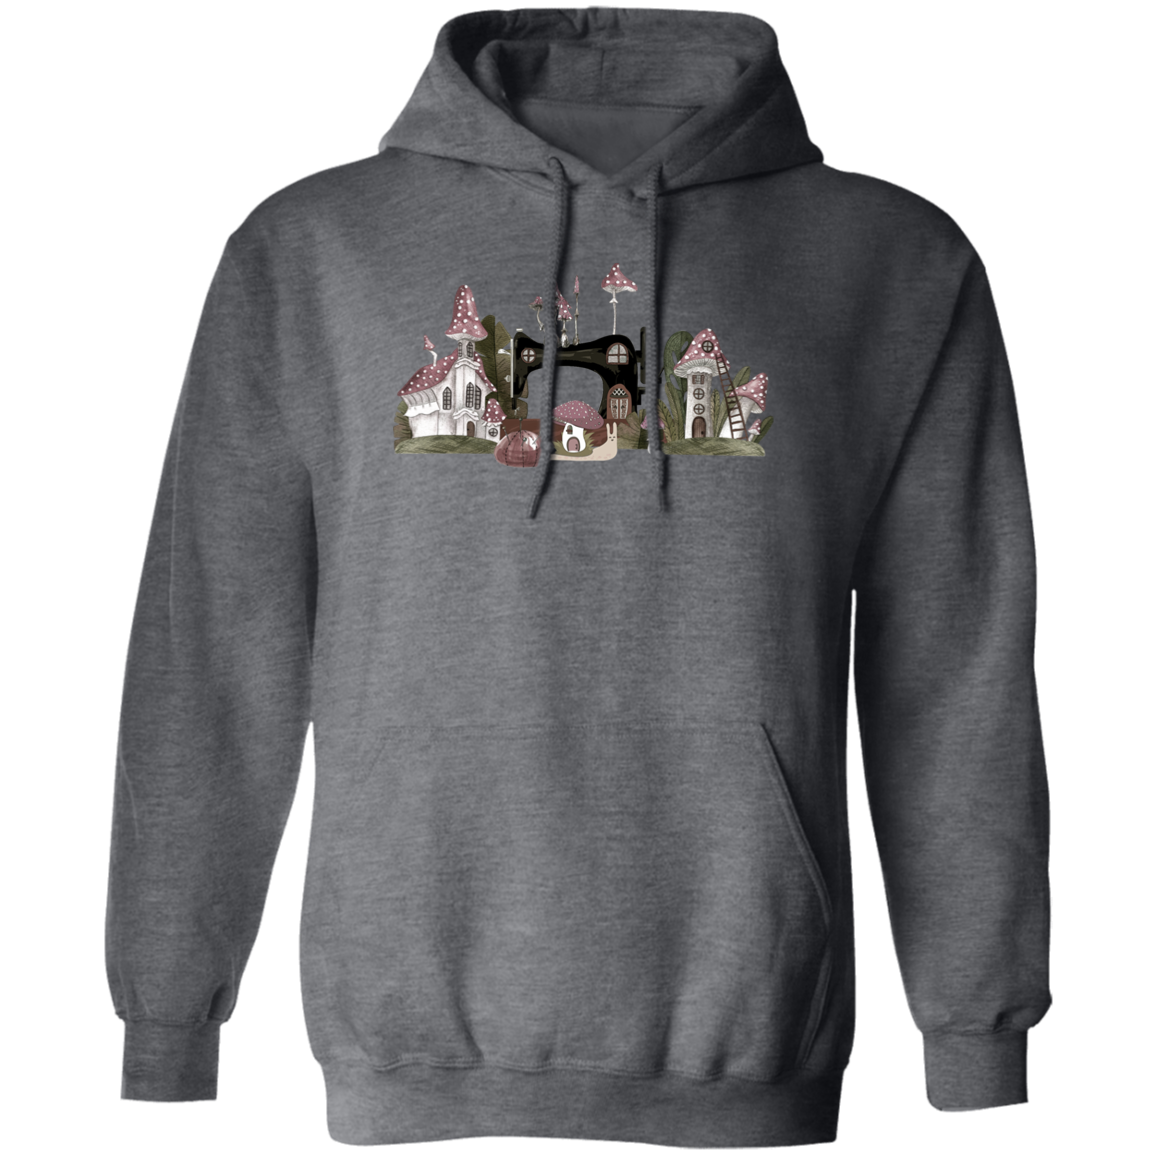 Cottagecore Sewing Mushroom Village Hoodie - Cute Gift for Sewing Friends & Family